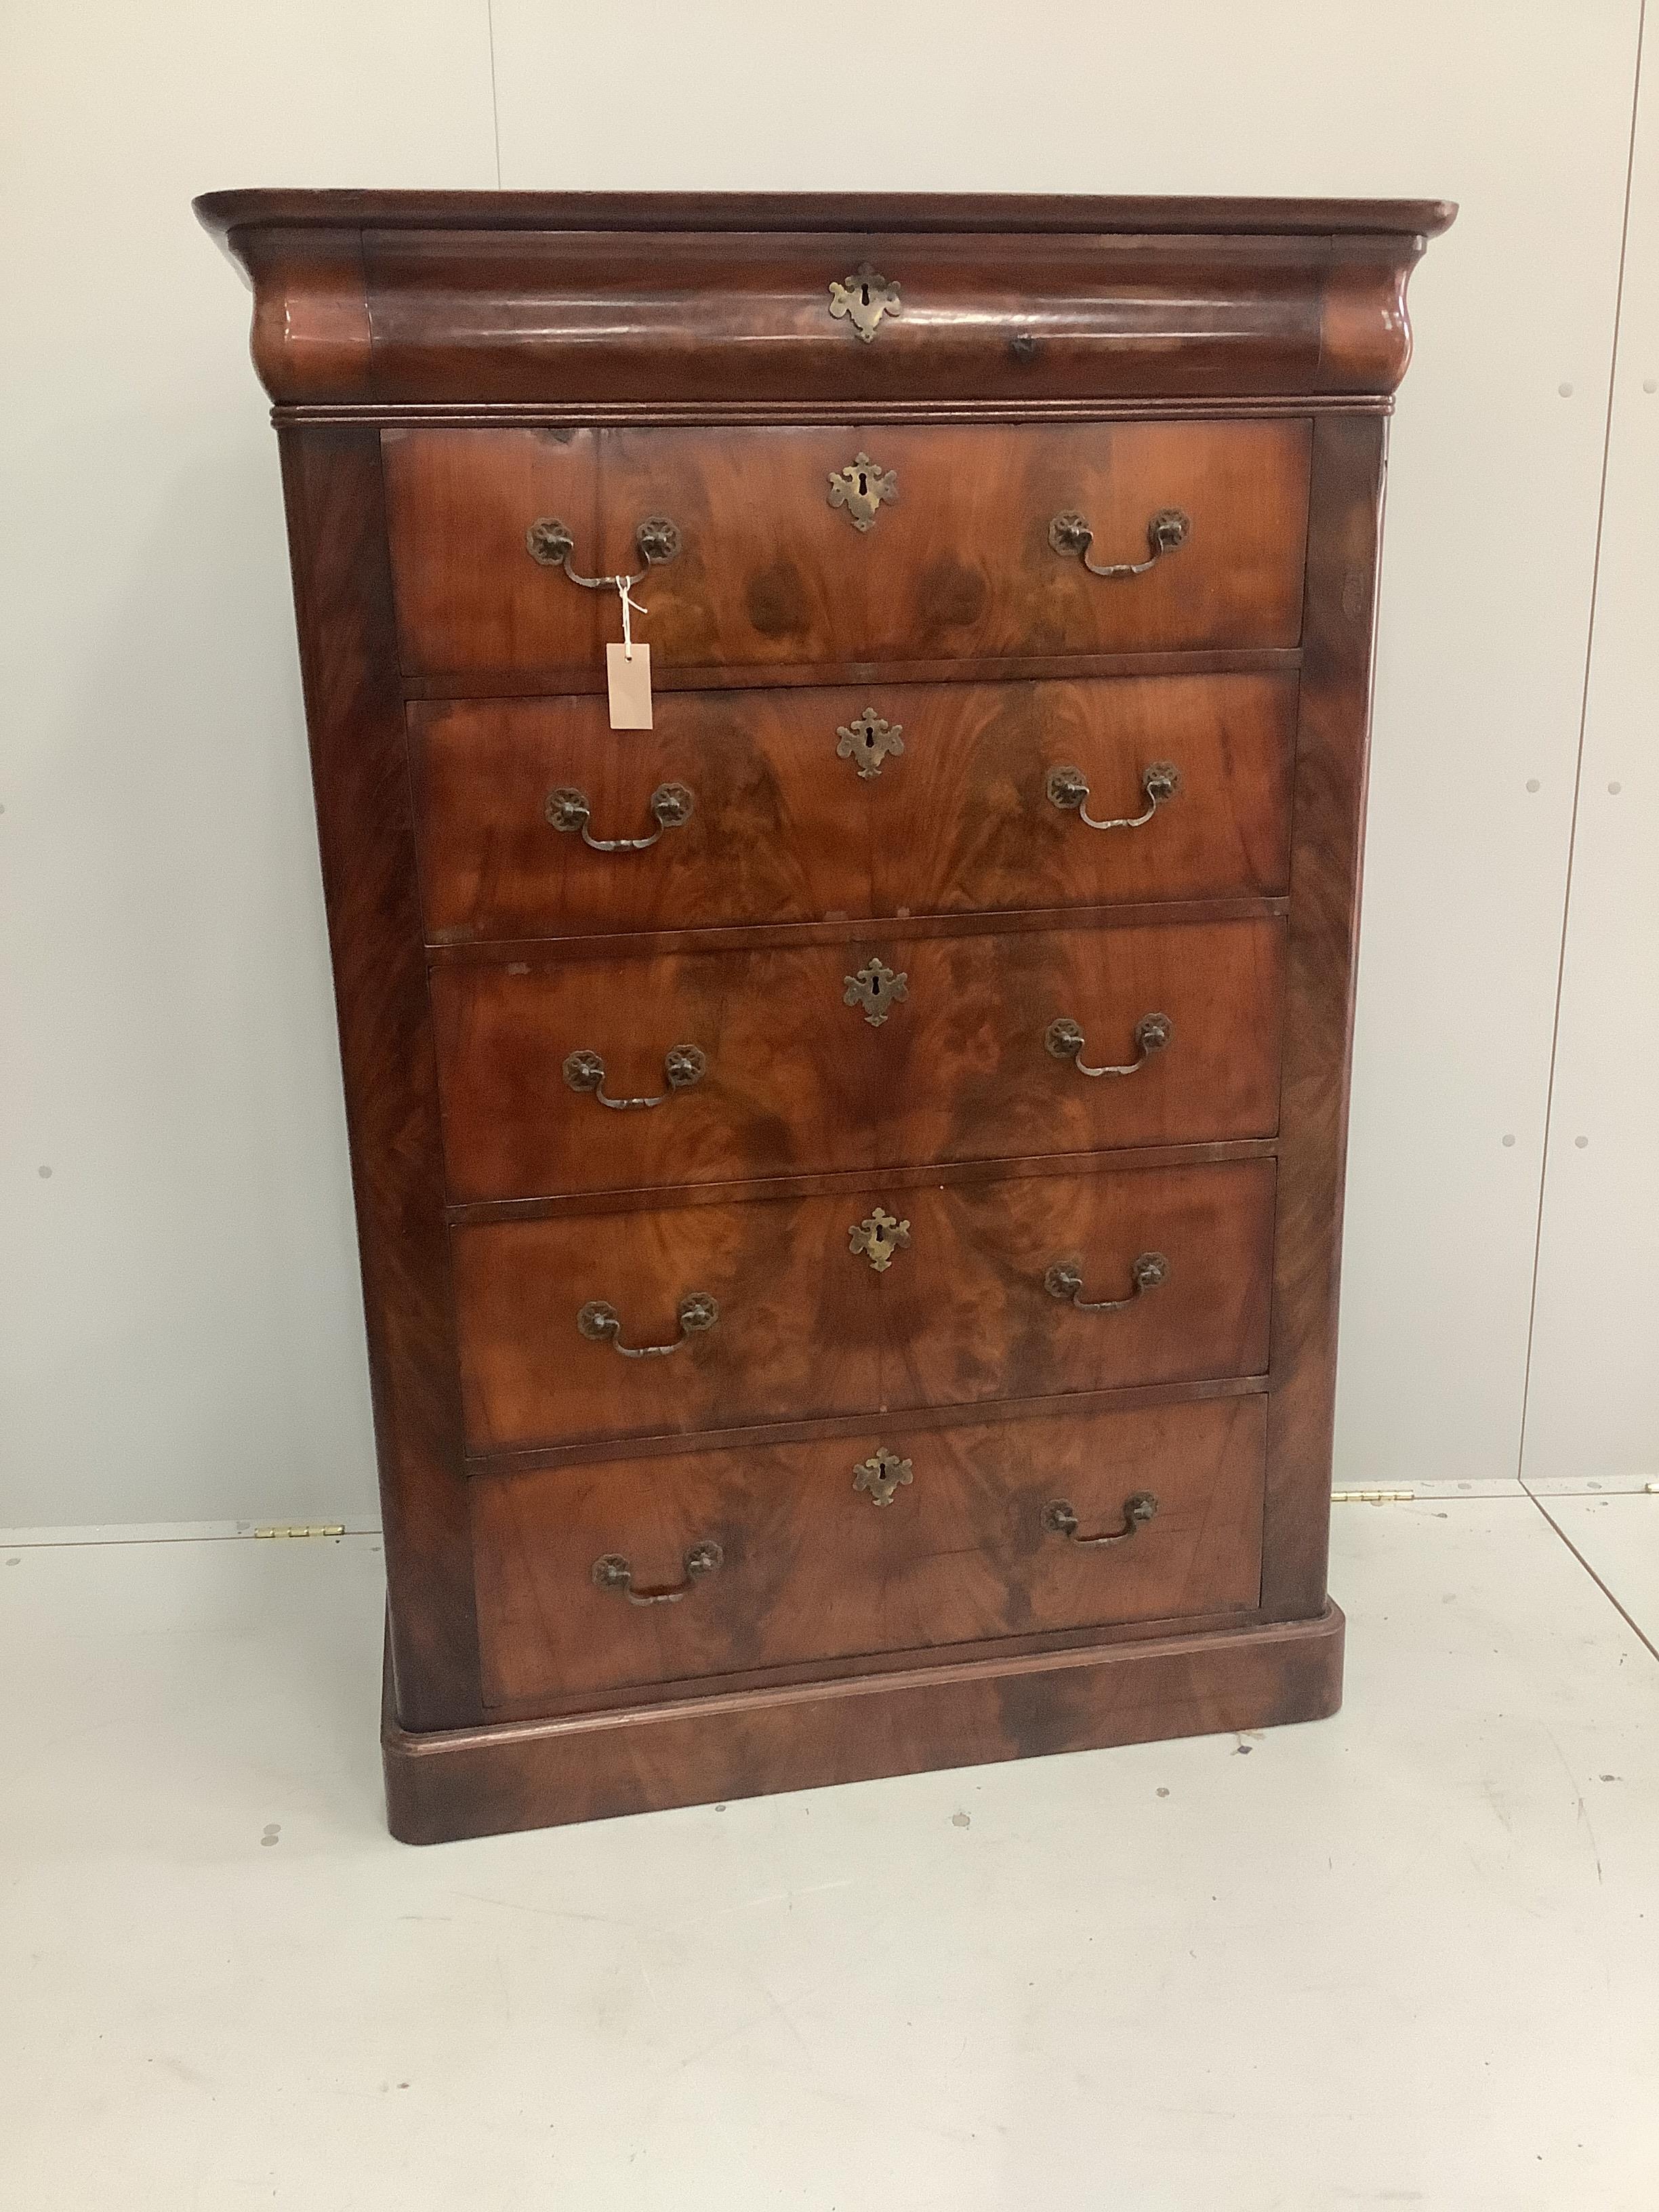 A 19th century French mahogany six drawer tall chest, width 104cm, depth 50cm, height 145cm